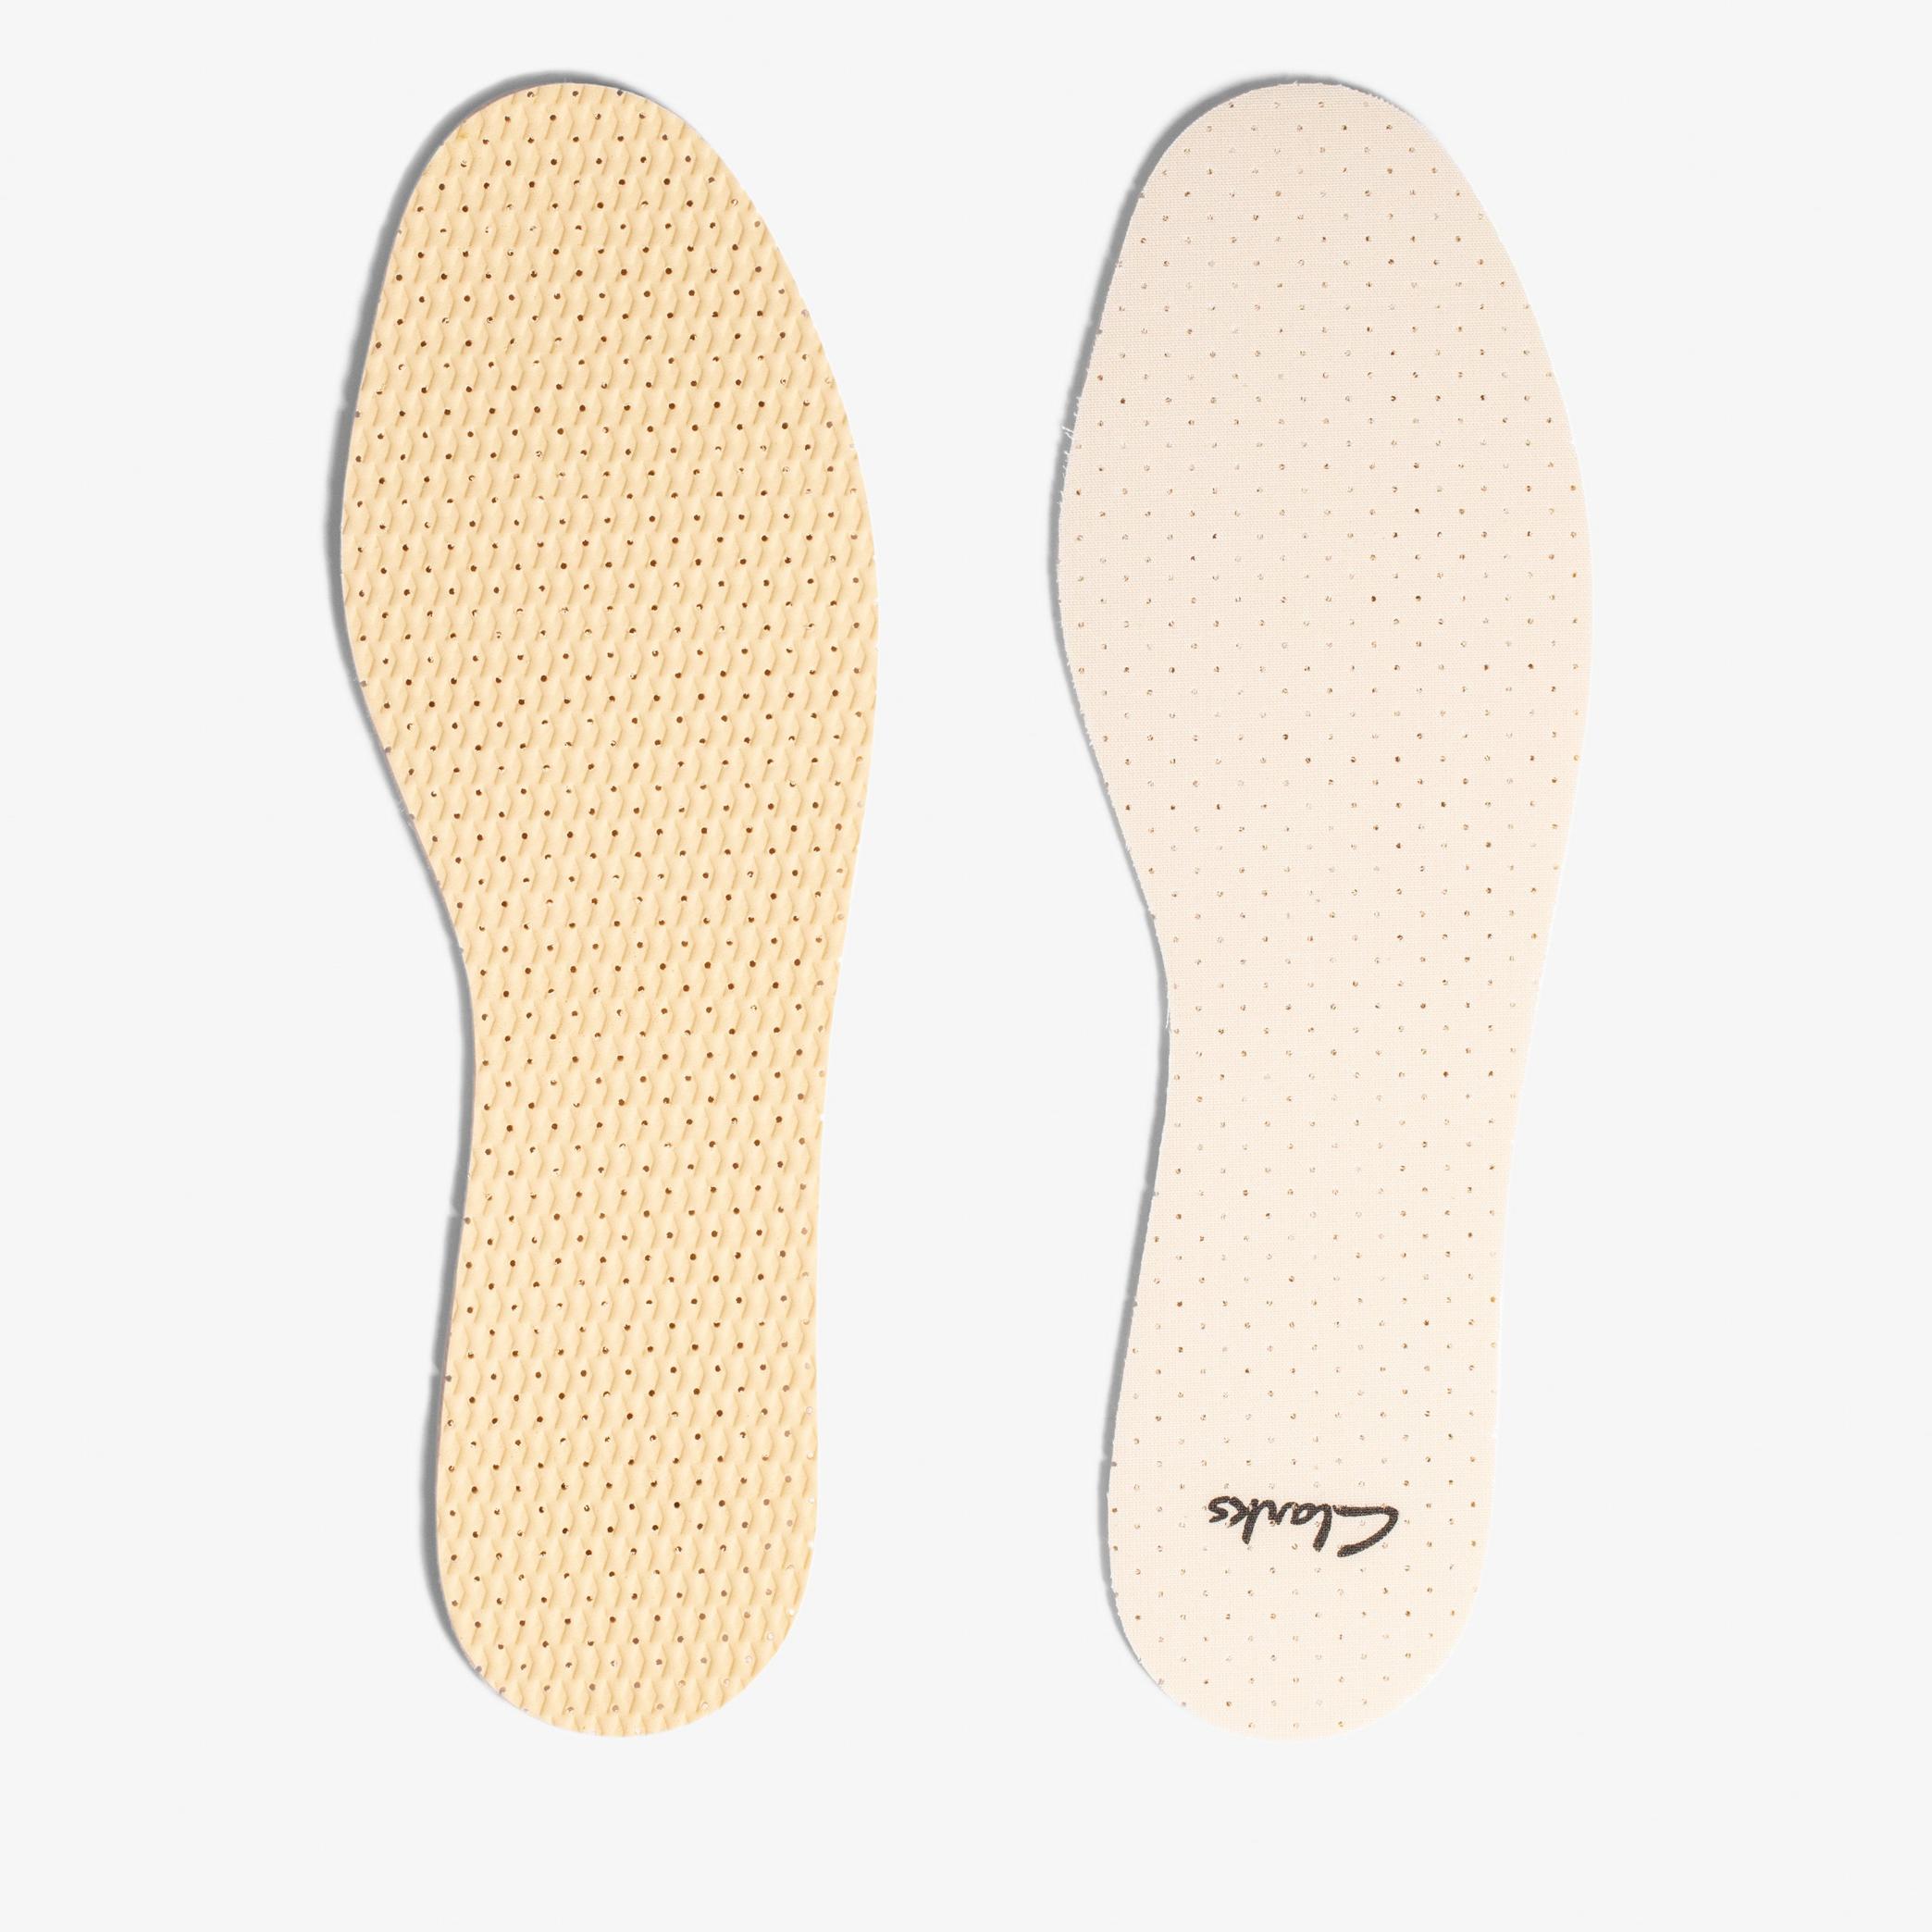 Foam Insoles size 7-8  Insoles, view 3 of 3